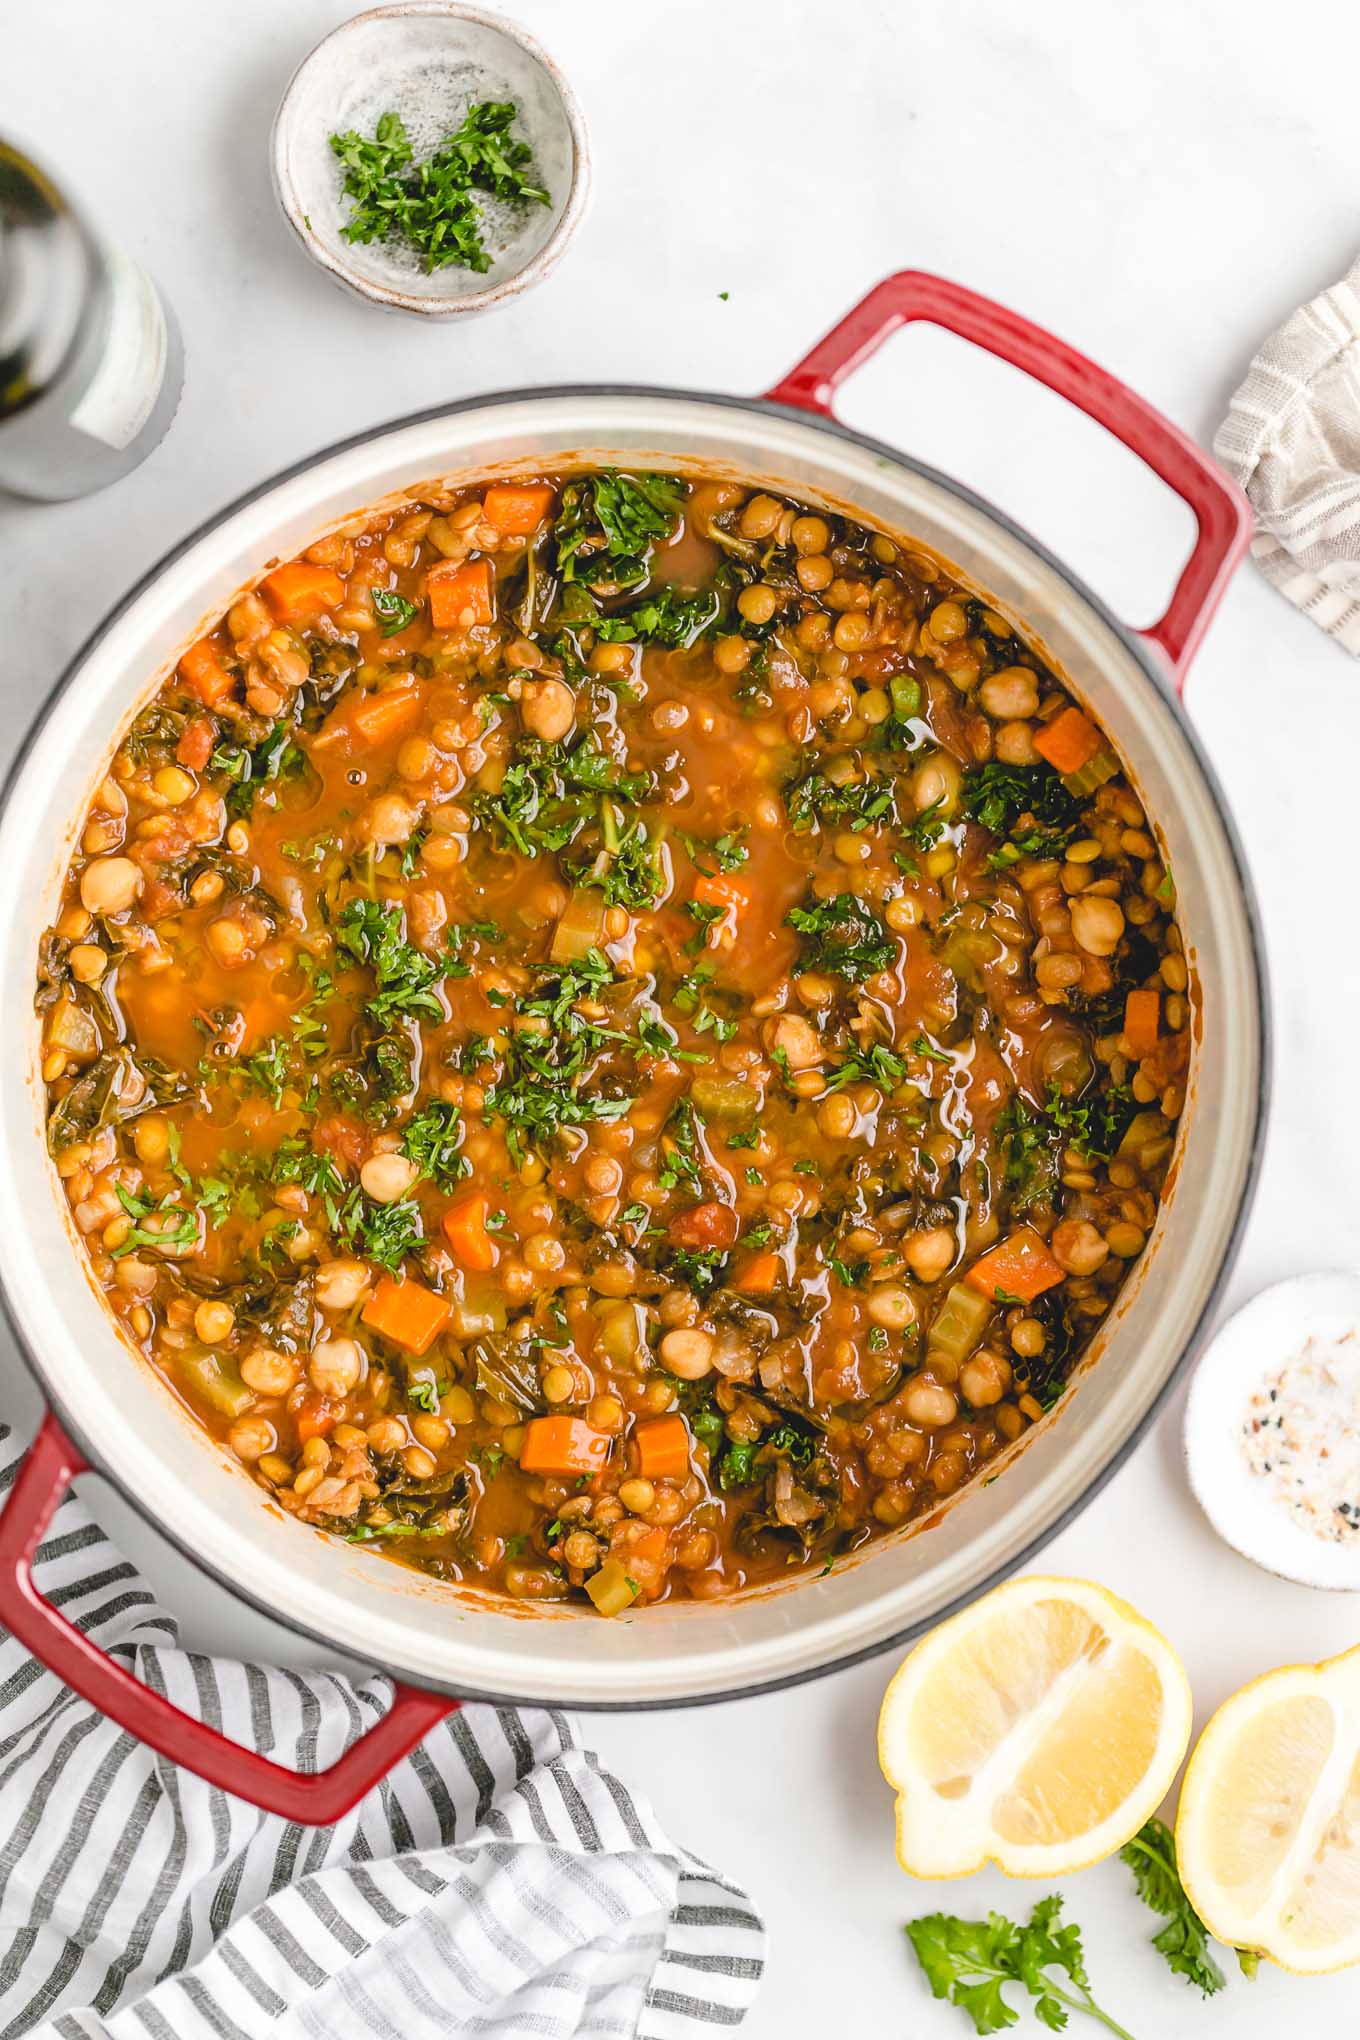 Vegetarian Lentil and Chickpea Soup - a vegetarian lentil soup recipe full of rich Moroccan-inspired flavors that’s packed with fiber, veggies, and protein! Great for meal prep!